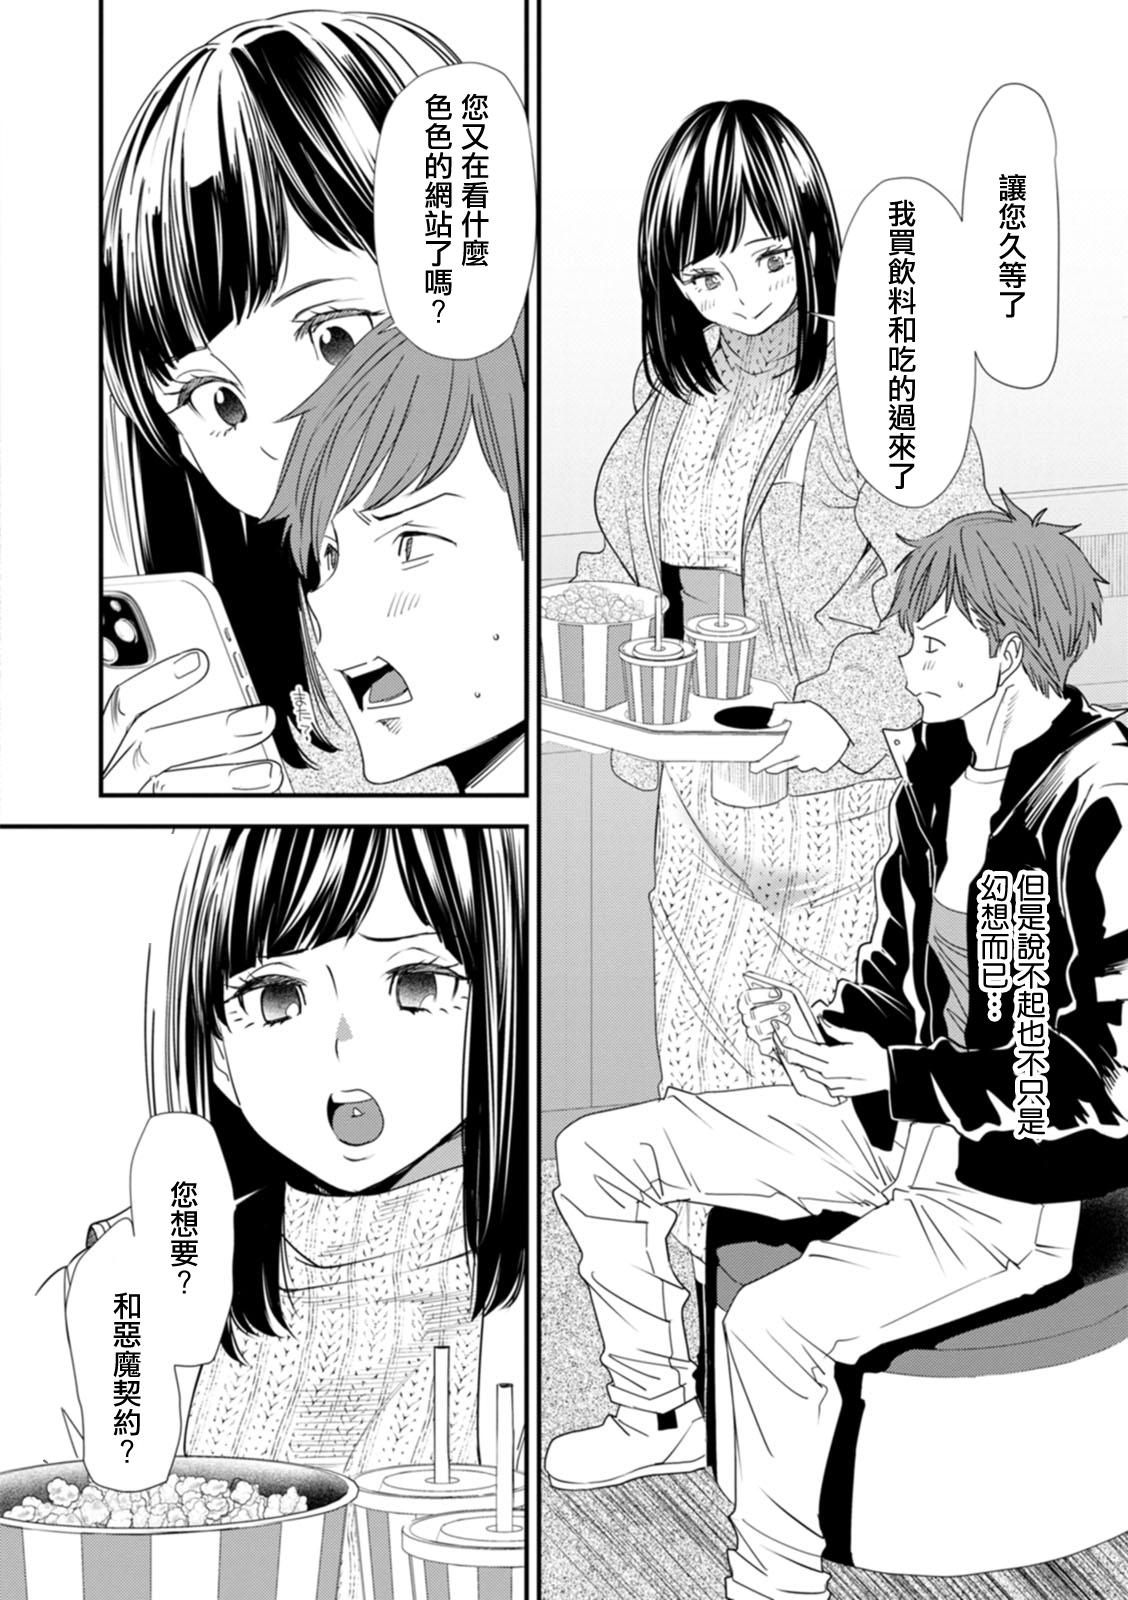 Interracial Inma Joshi Daisei no Yuuutsu - The Melancholy of the Succubus who is a college student Ch. 5 Big Booty - Page 2